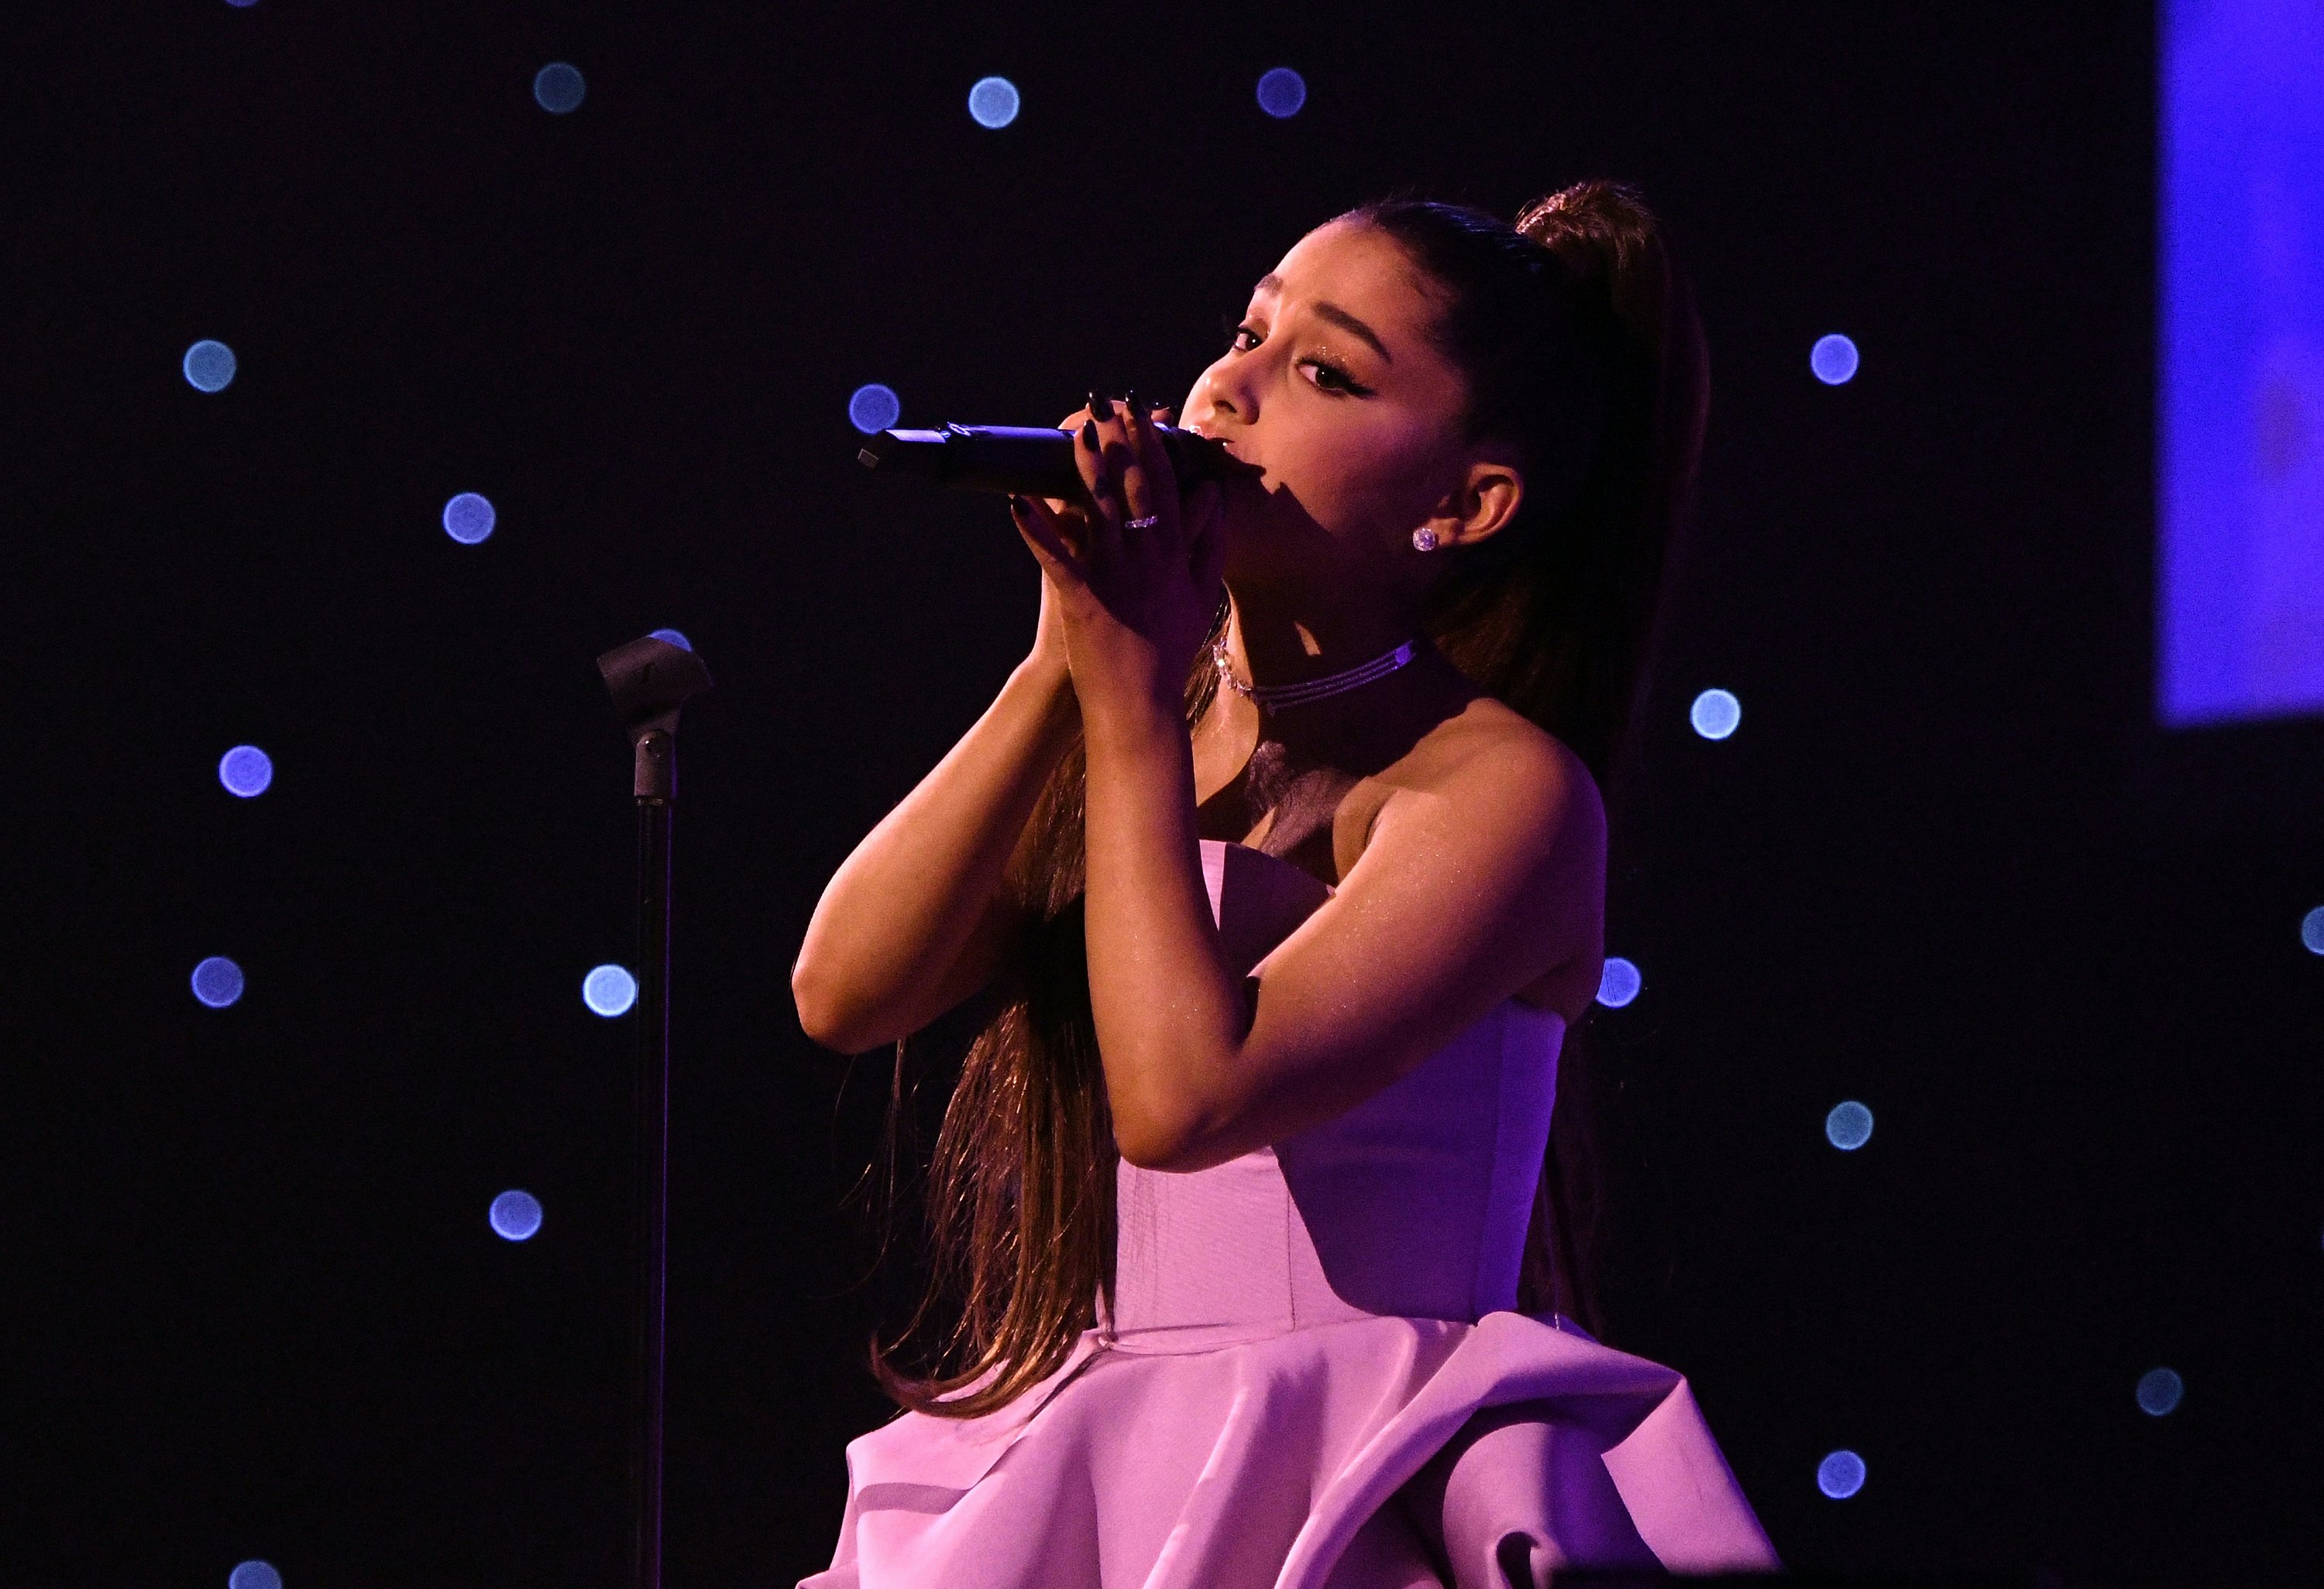 Ariana Grandes Sweetener Tour Photo Policy Reportedly Has